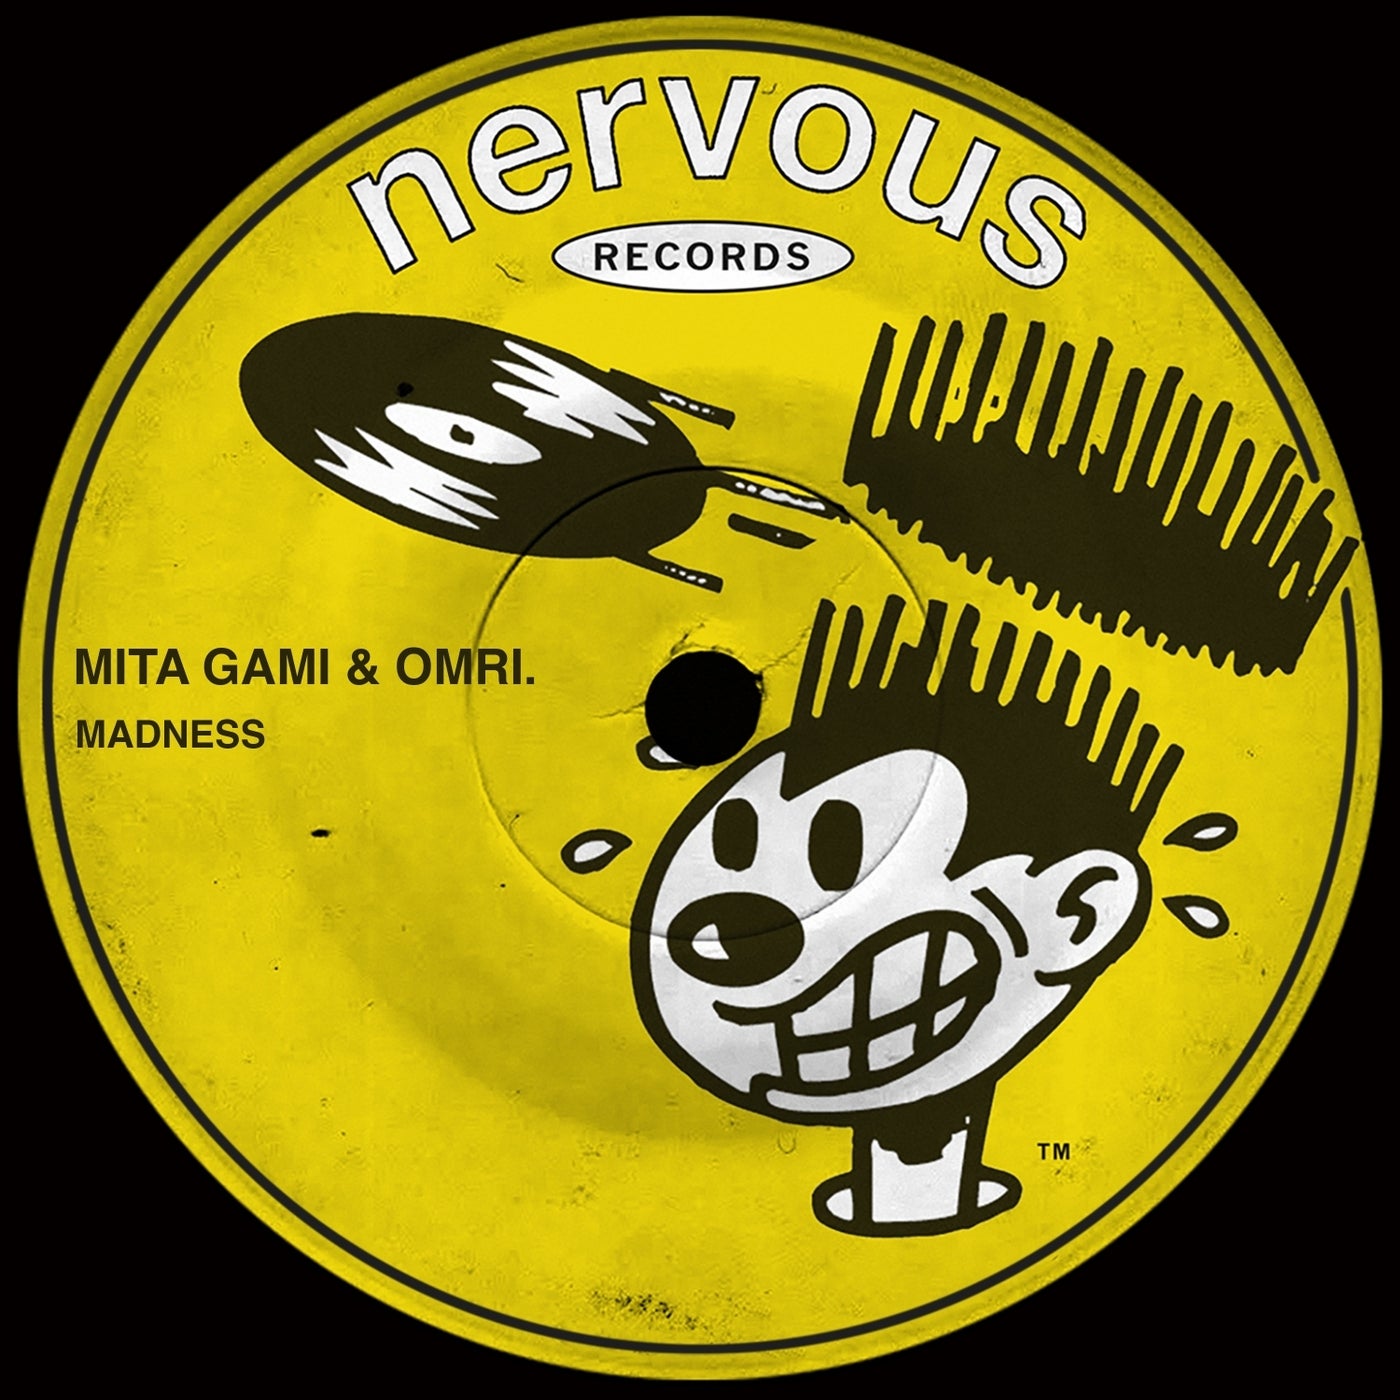 image cover: Mita Gami, OMRI. - Madness on Nervous Records